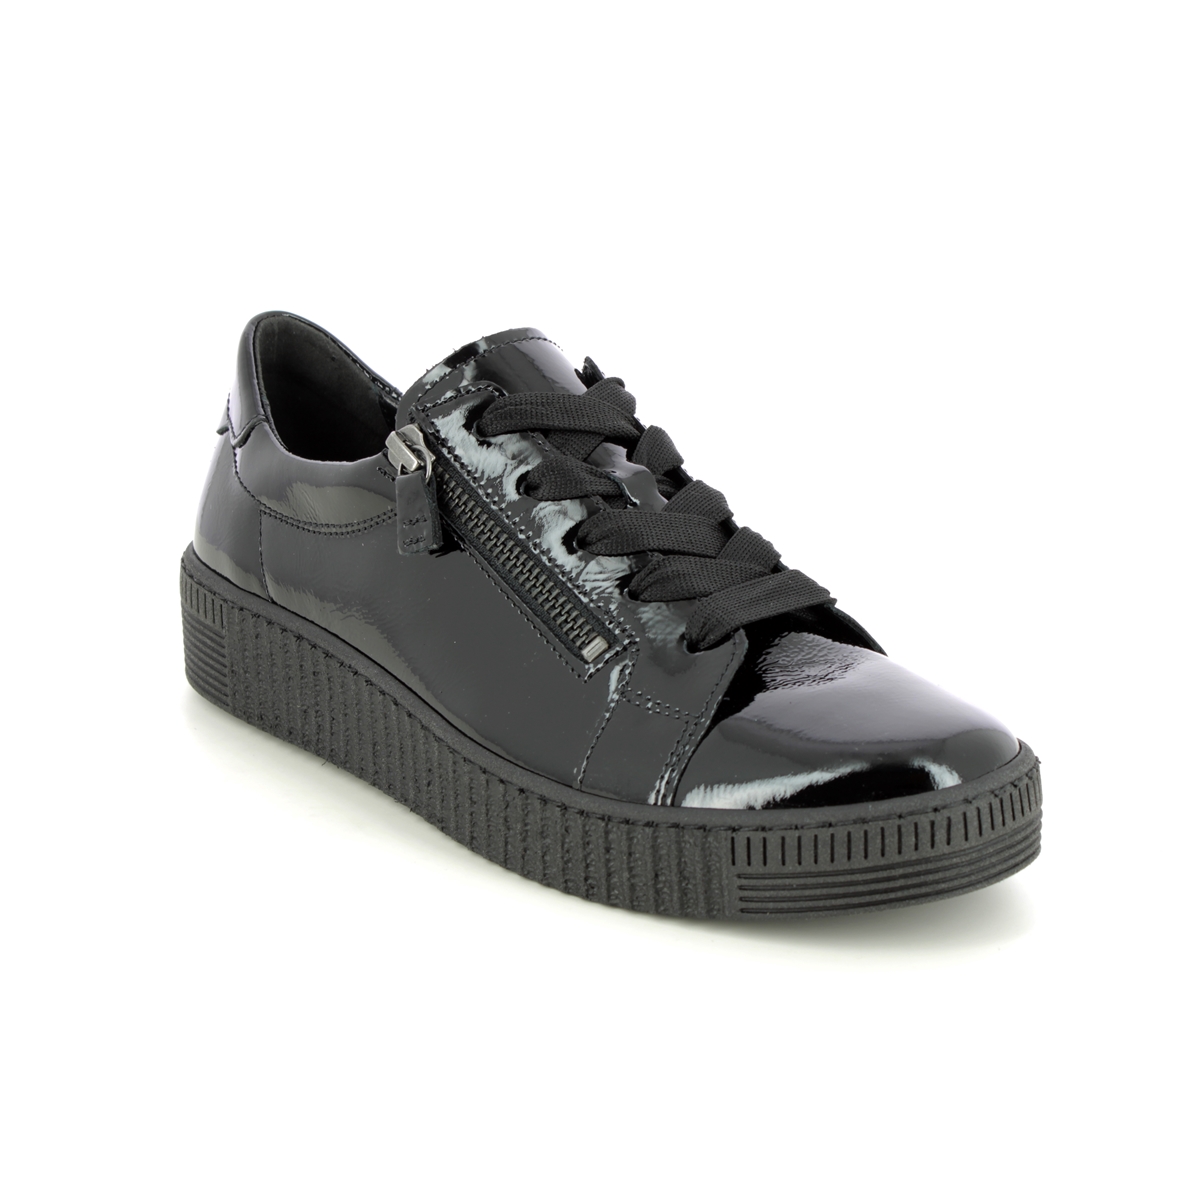 Gabor Wisdom Black Patent Womens Trainers 93.334.97 In Size 7 In Plain Black Patent  Womens Trainers In Soft Black Patent Leather